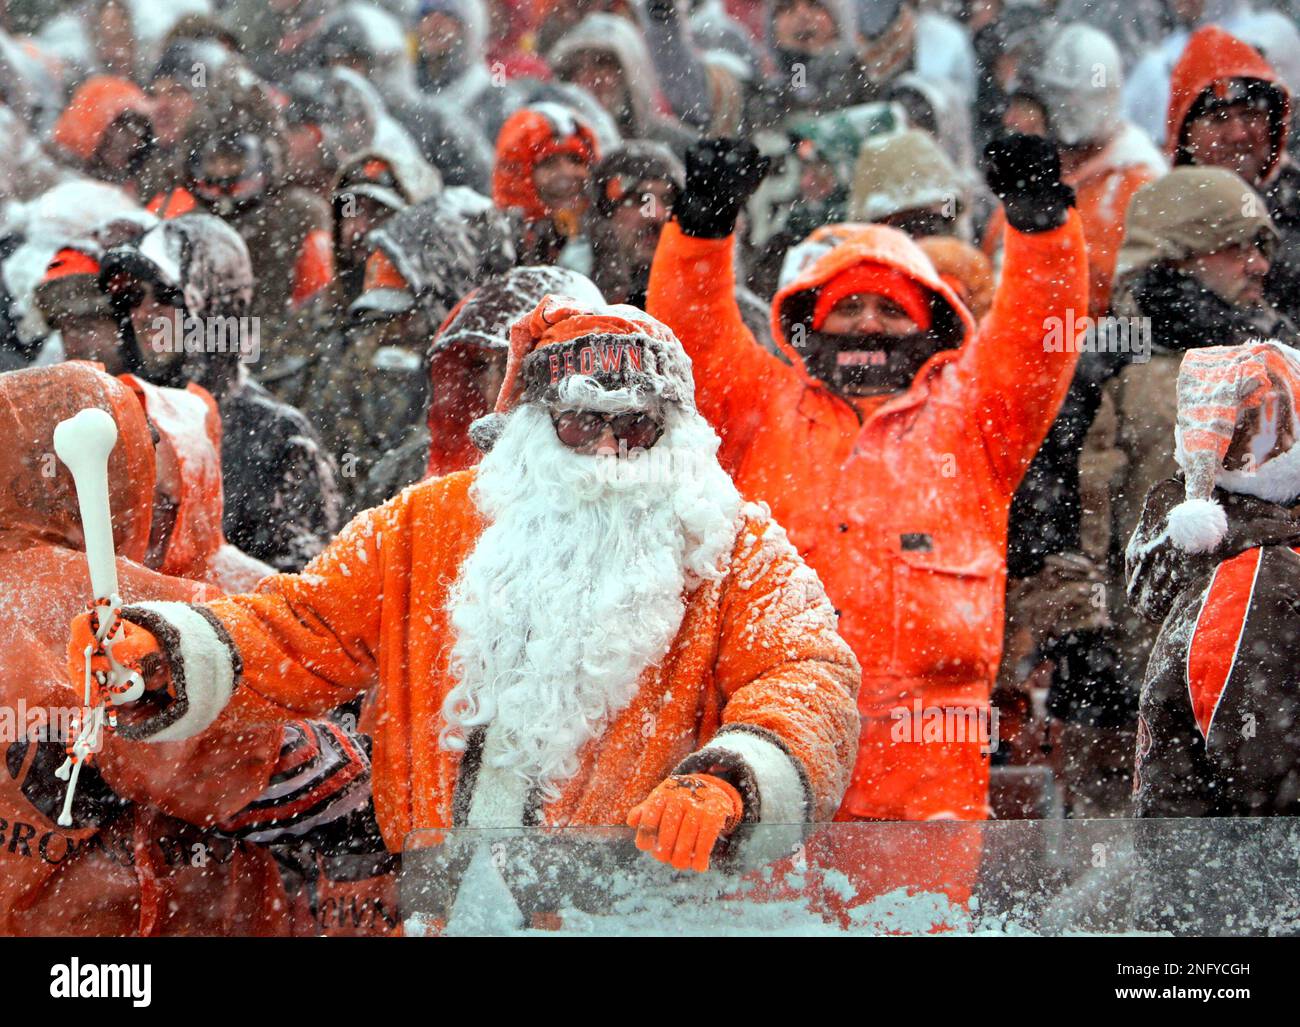 Cleveland Browns fans cheer in the snow during an NFL football